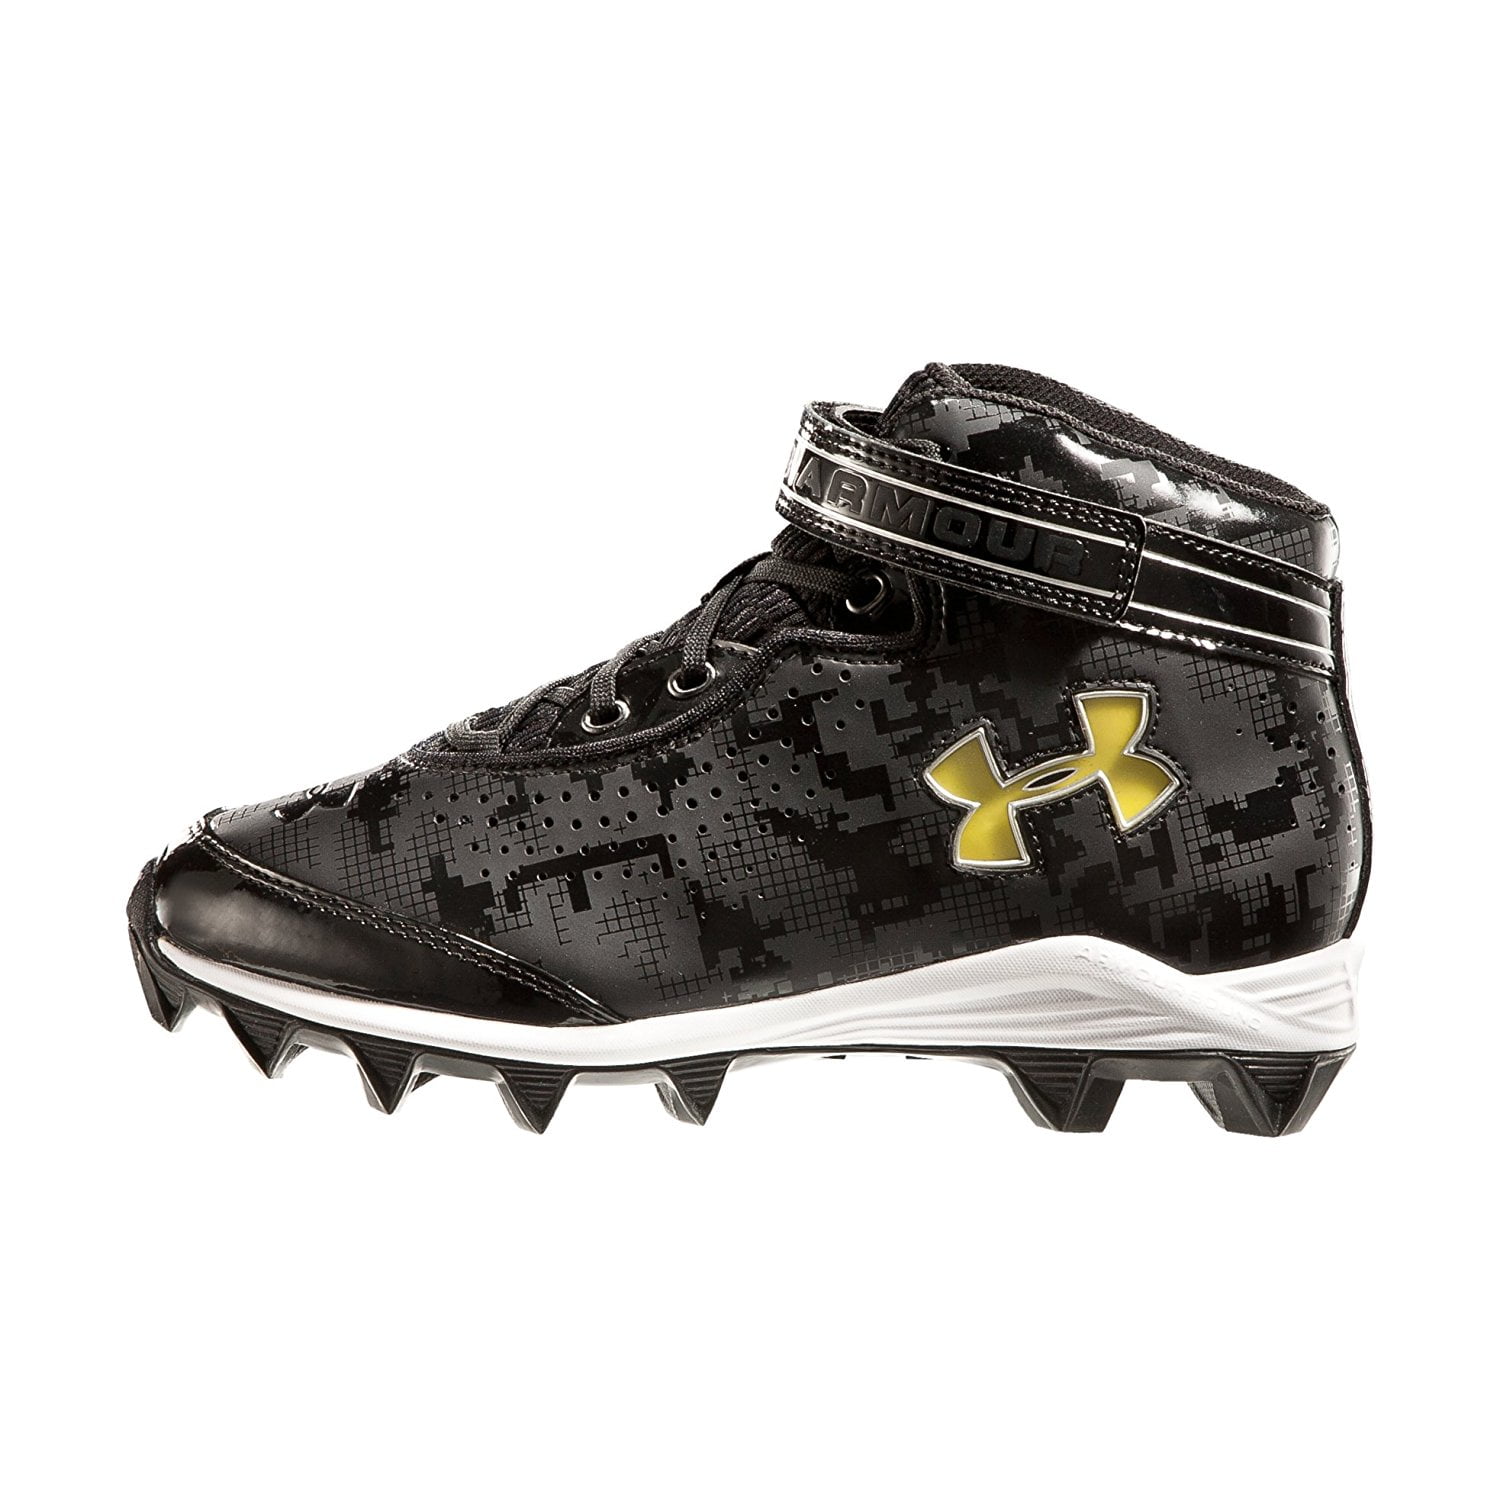 Under Armour Jr 1269697-081 Highlight RM Football Cleat SIZE 4Y Blk/Org C68 New 